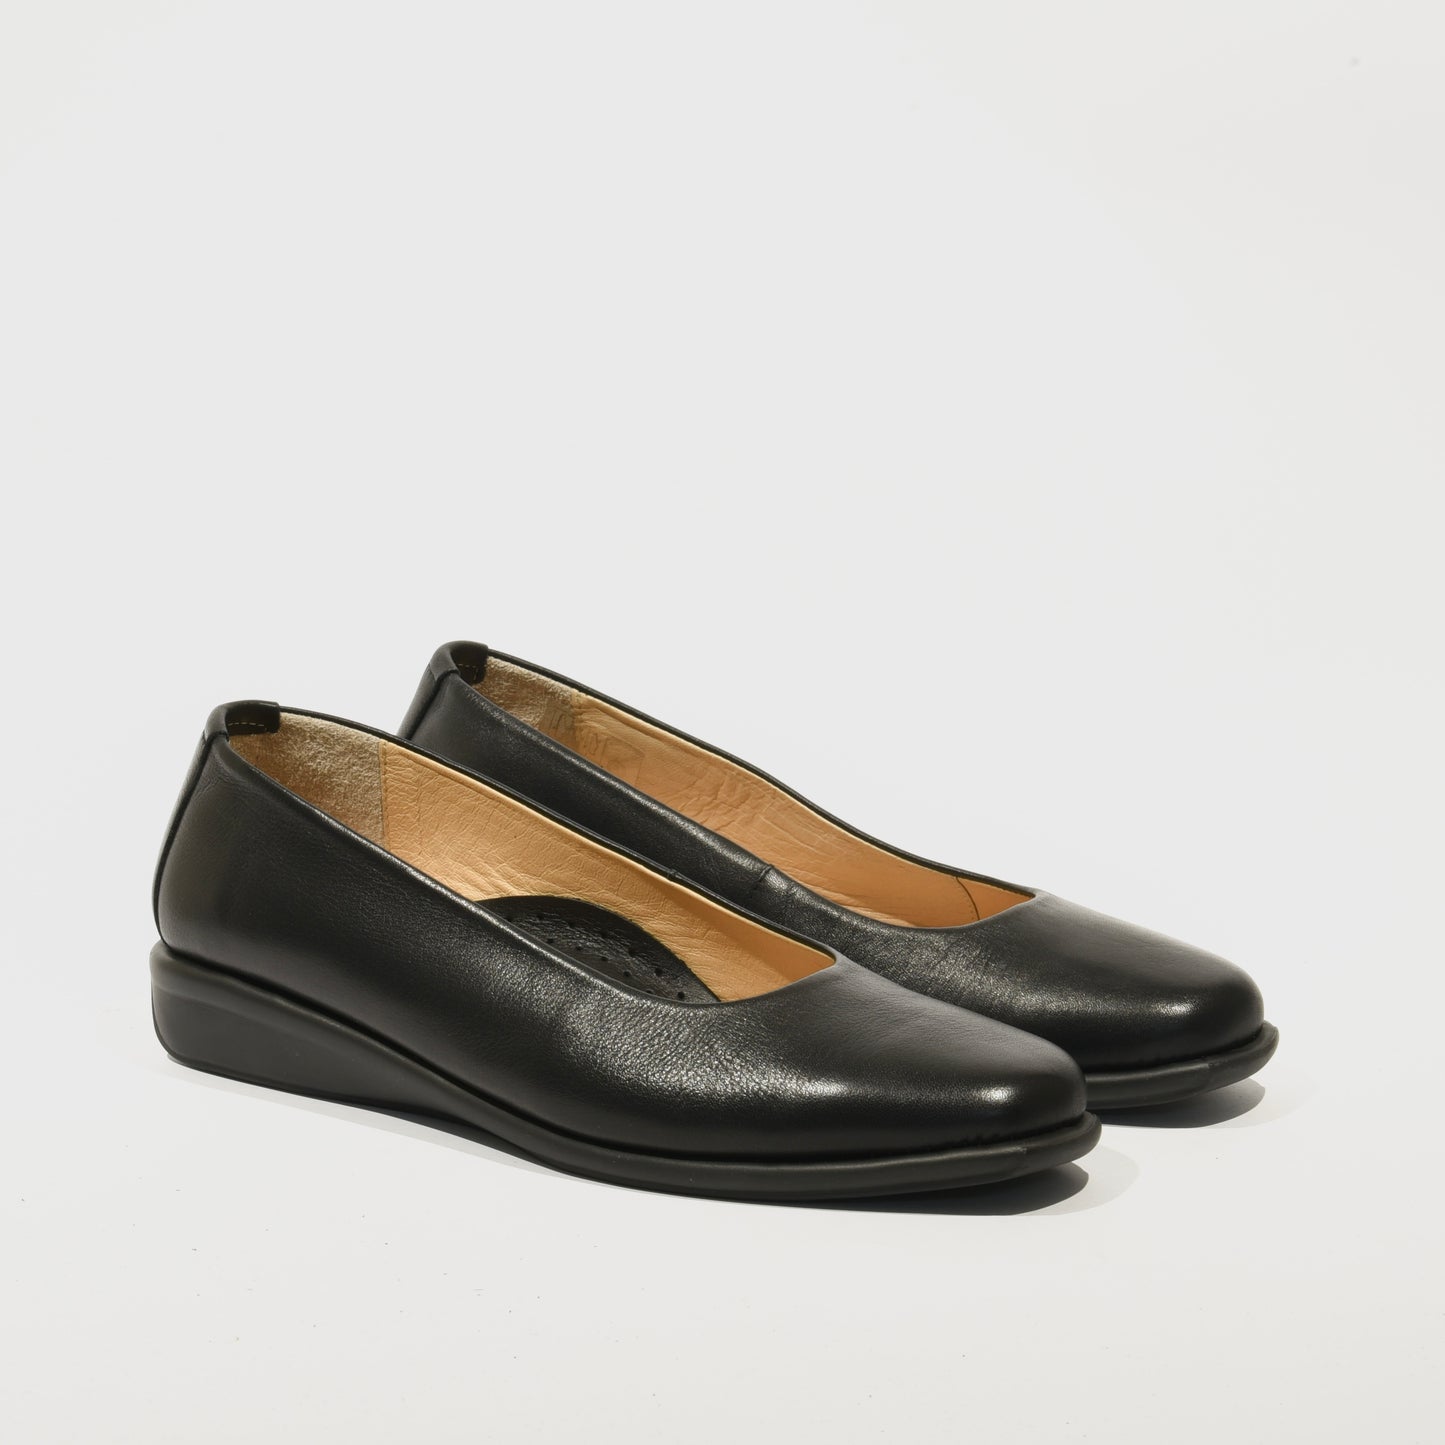 DFC 100% Genuine Leather Greek loafers for Women in Smooth Black